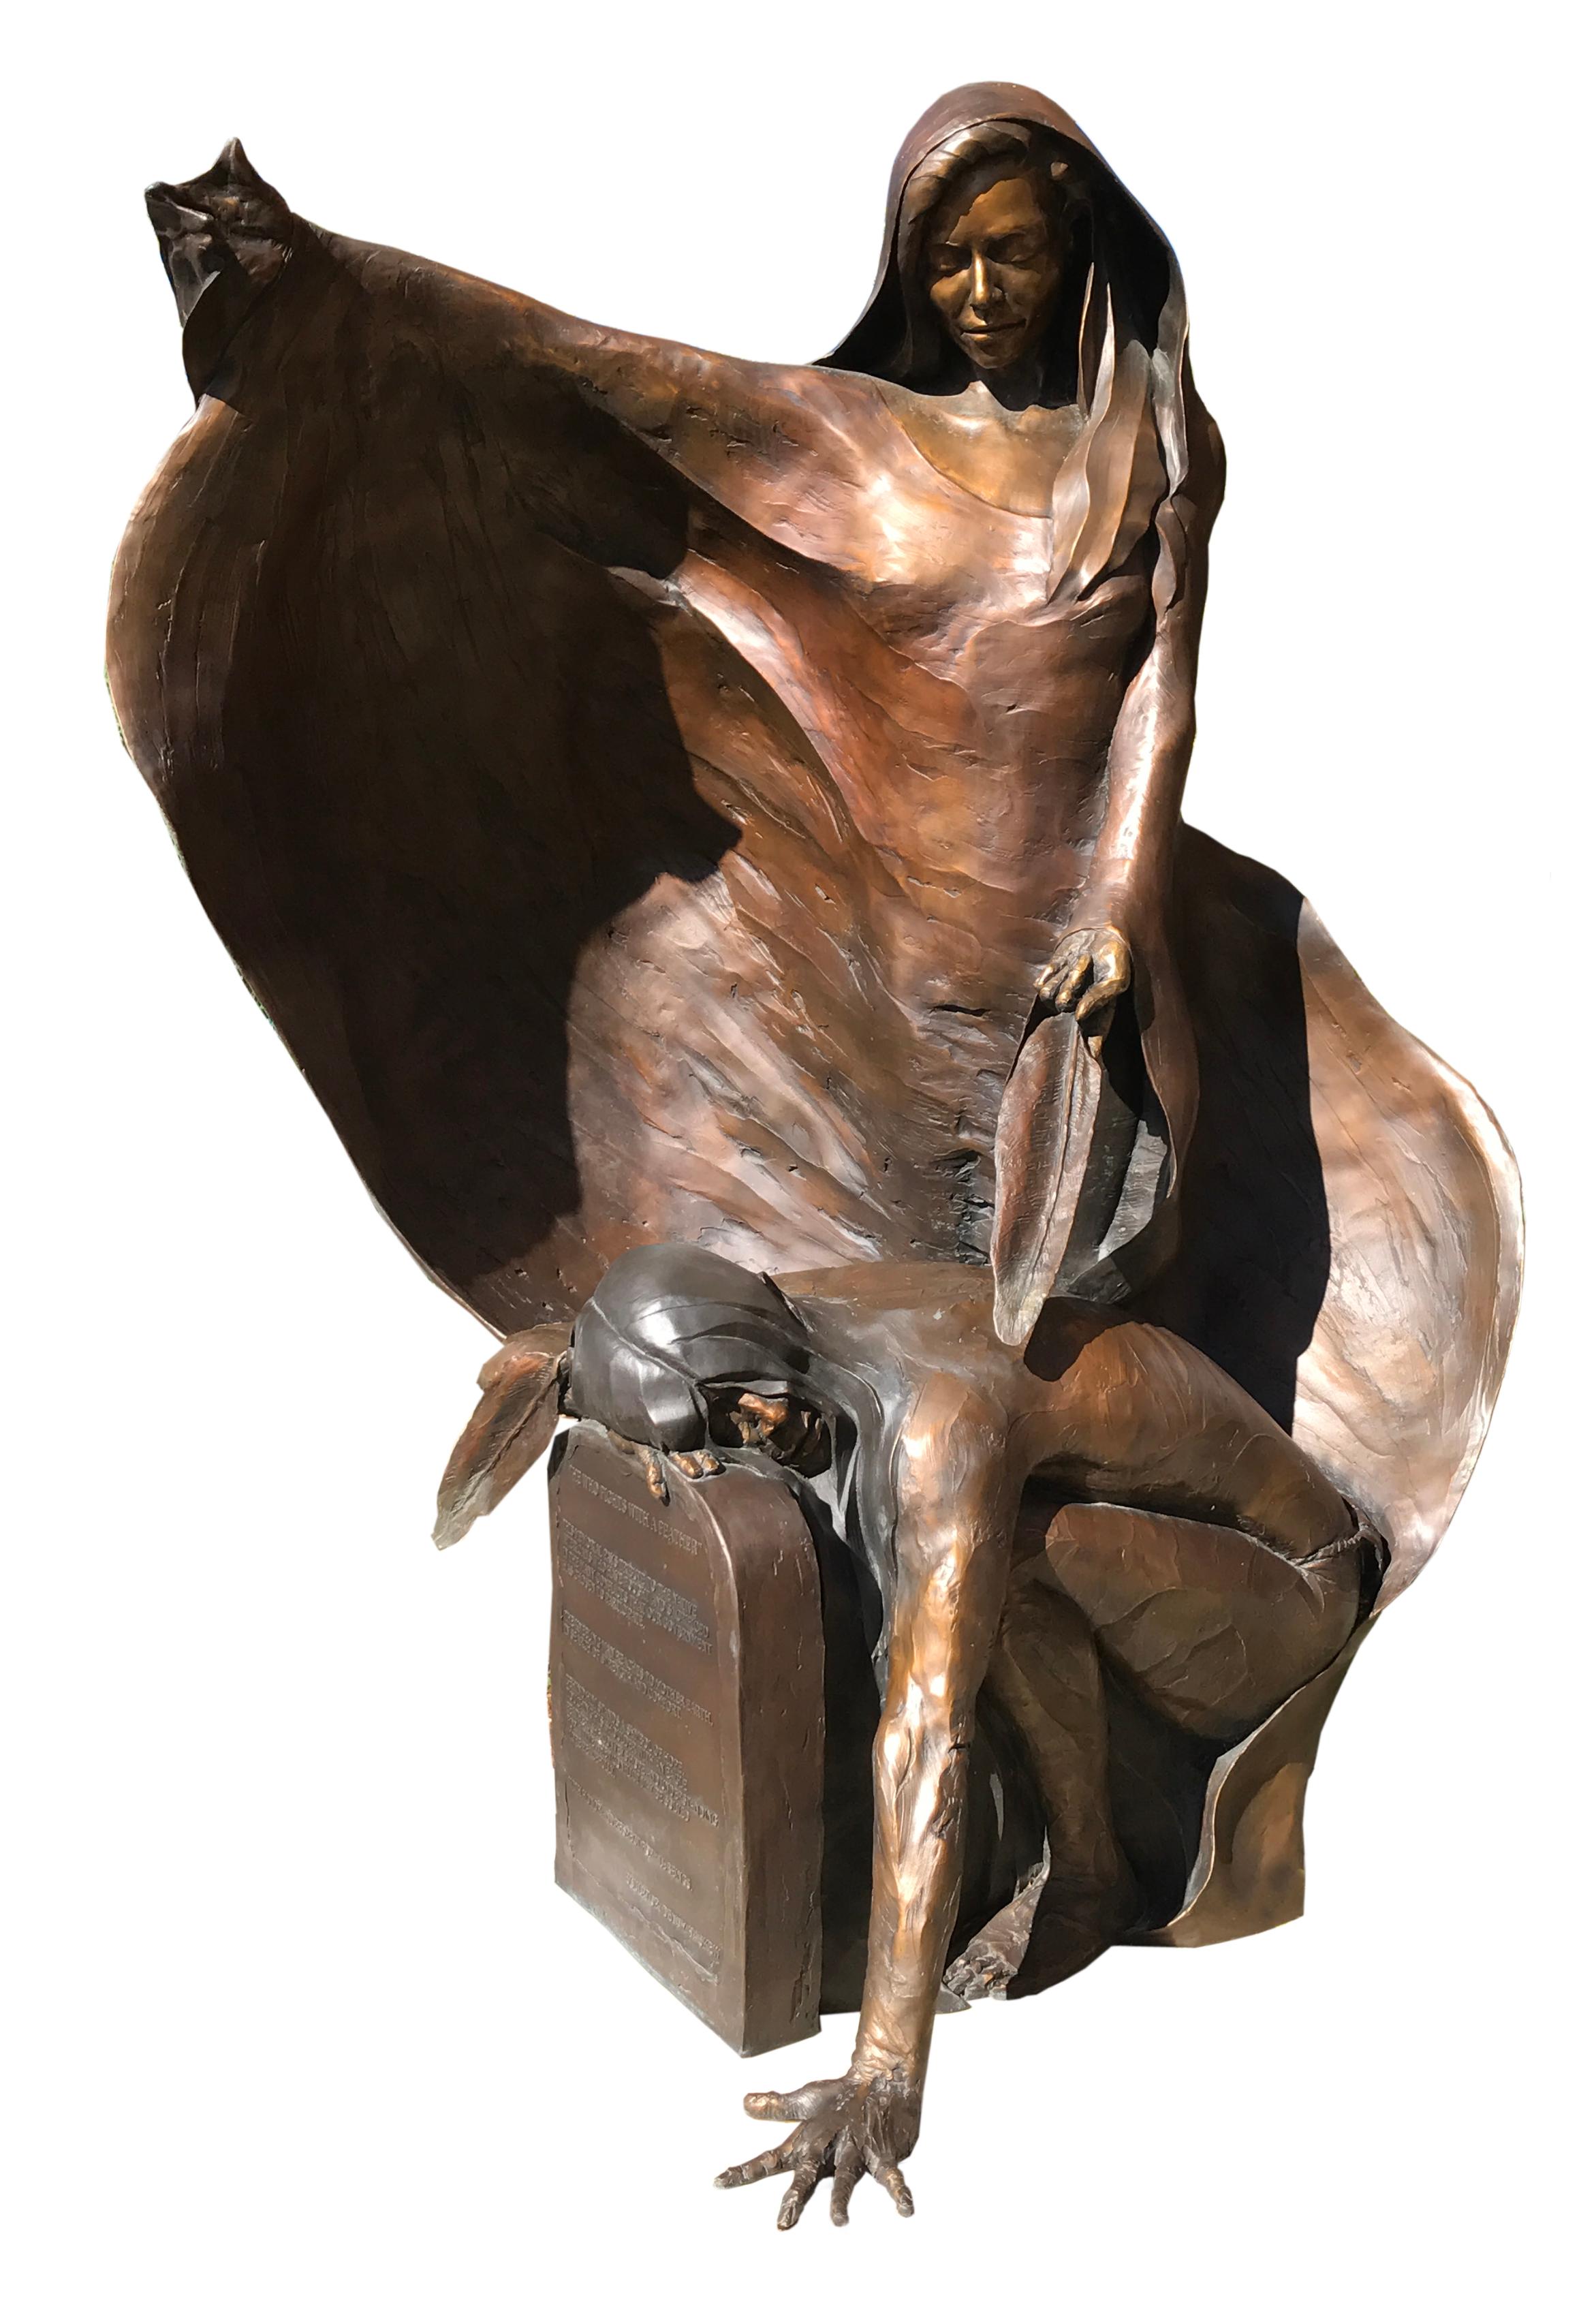 He Who Fights With a Feather - Sculpture by Denny Haskew